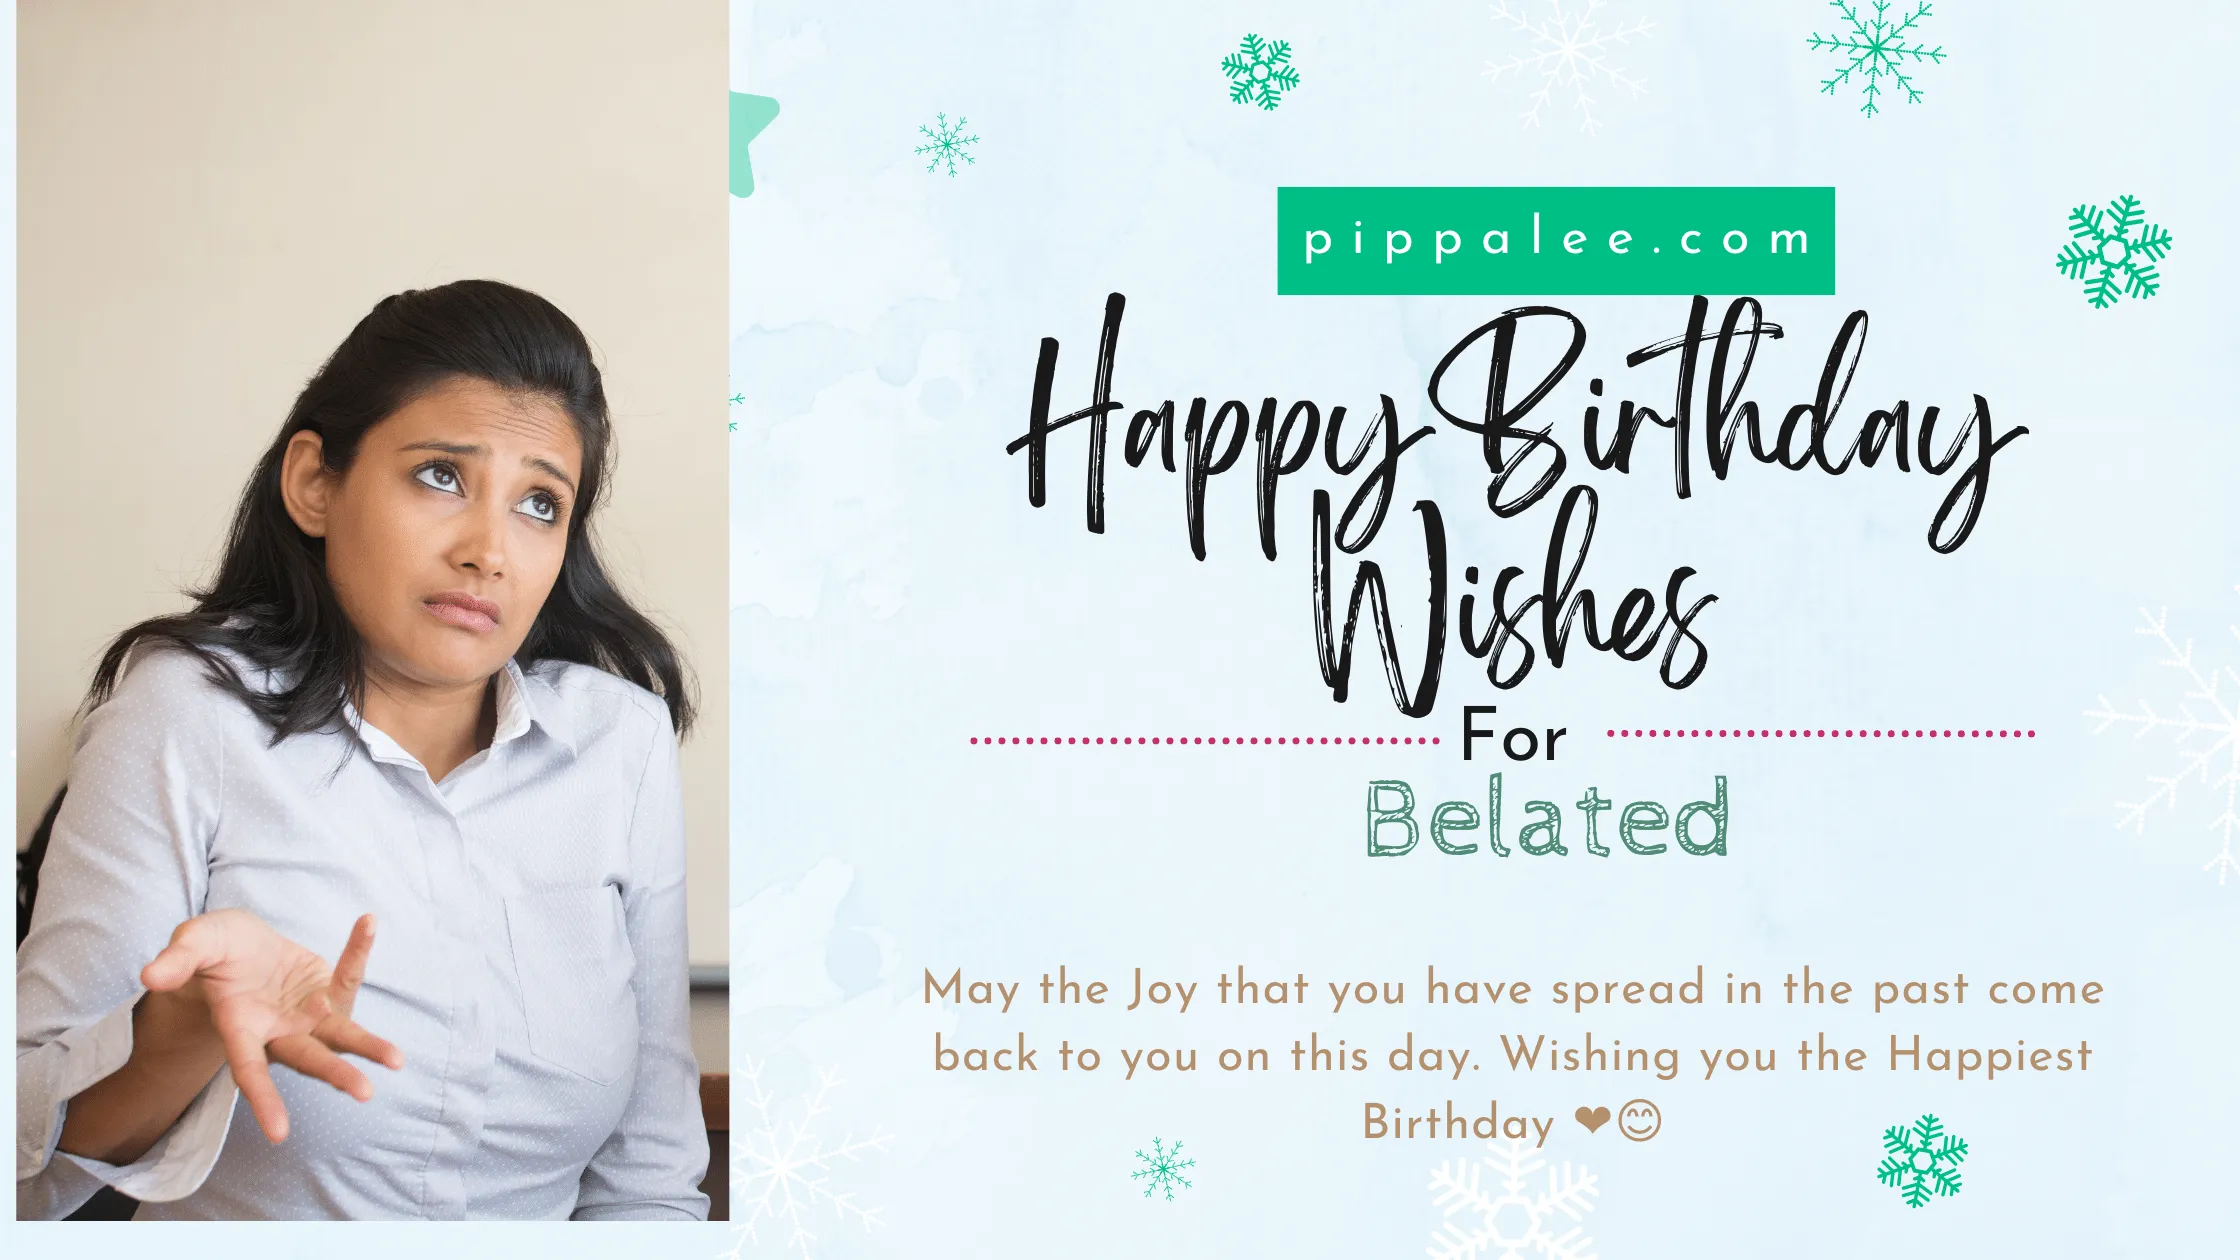 Happy Belated Birthday Wishes - Wishes & Messages